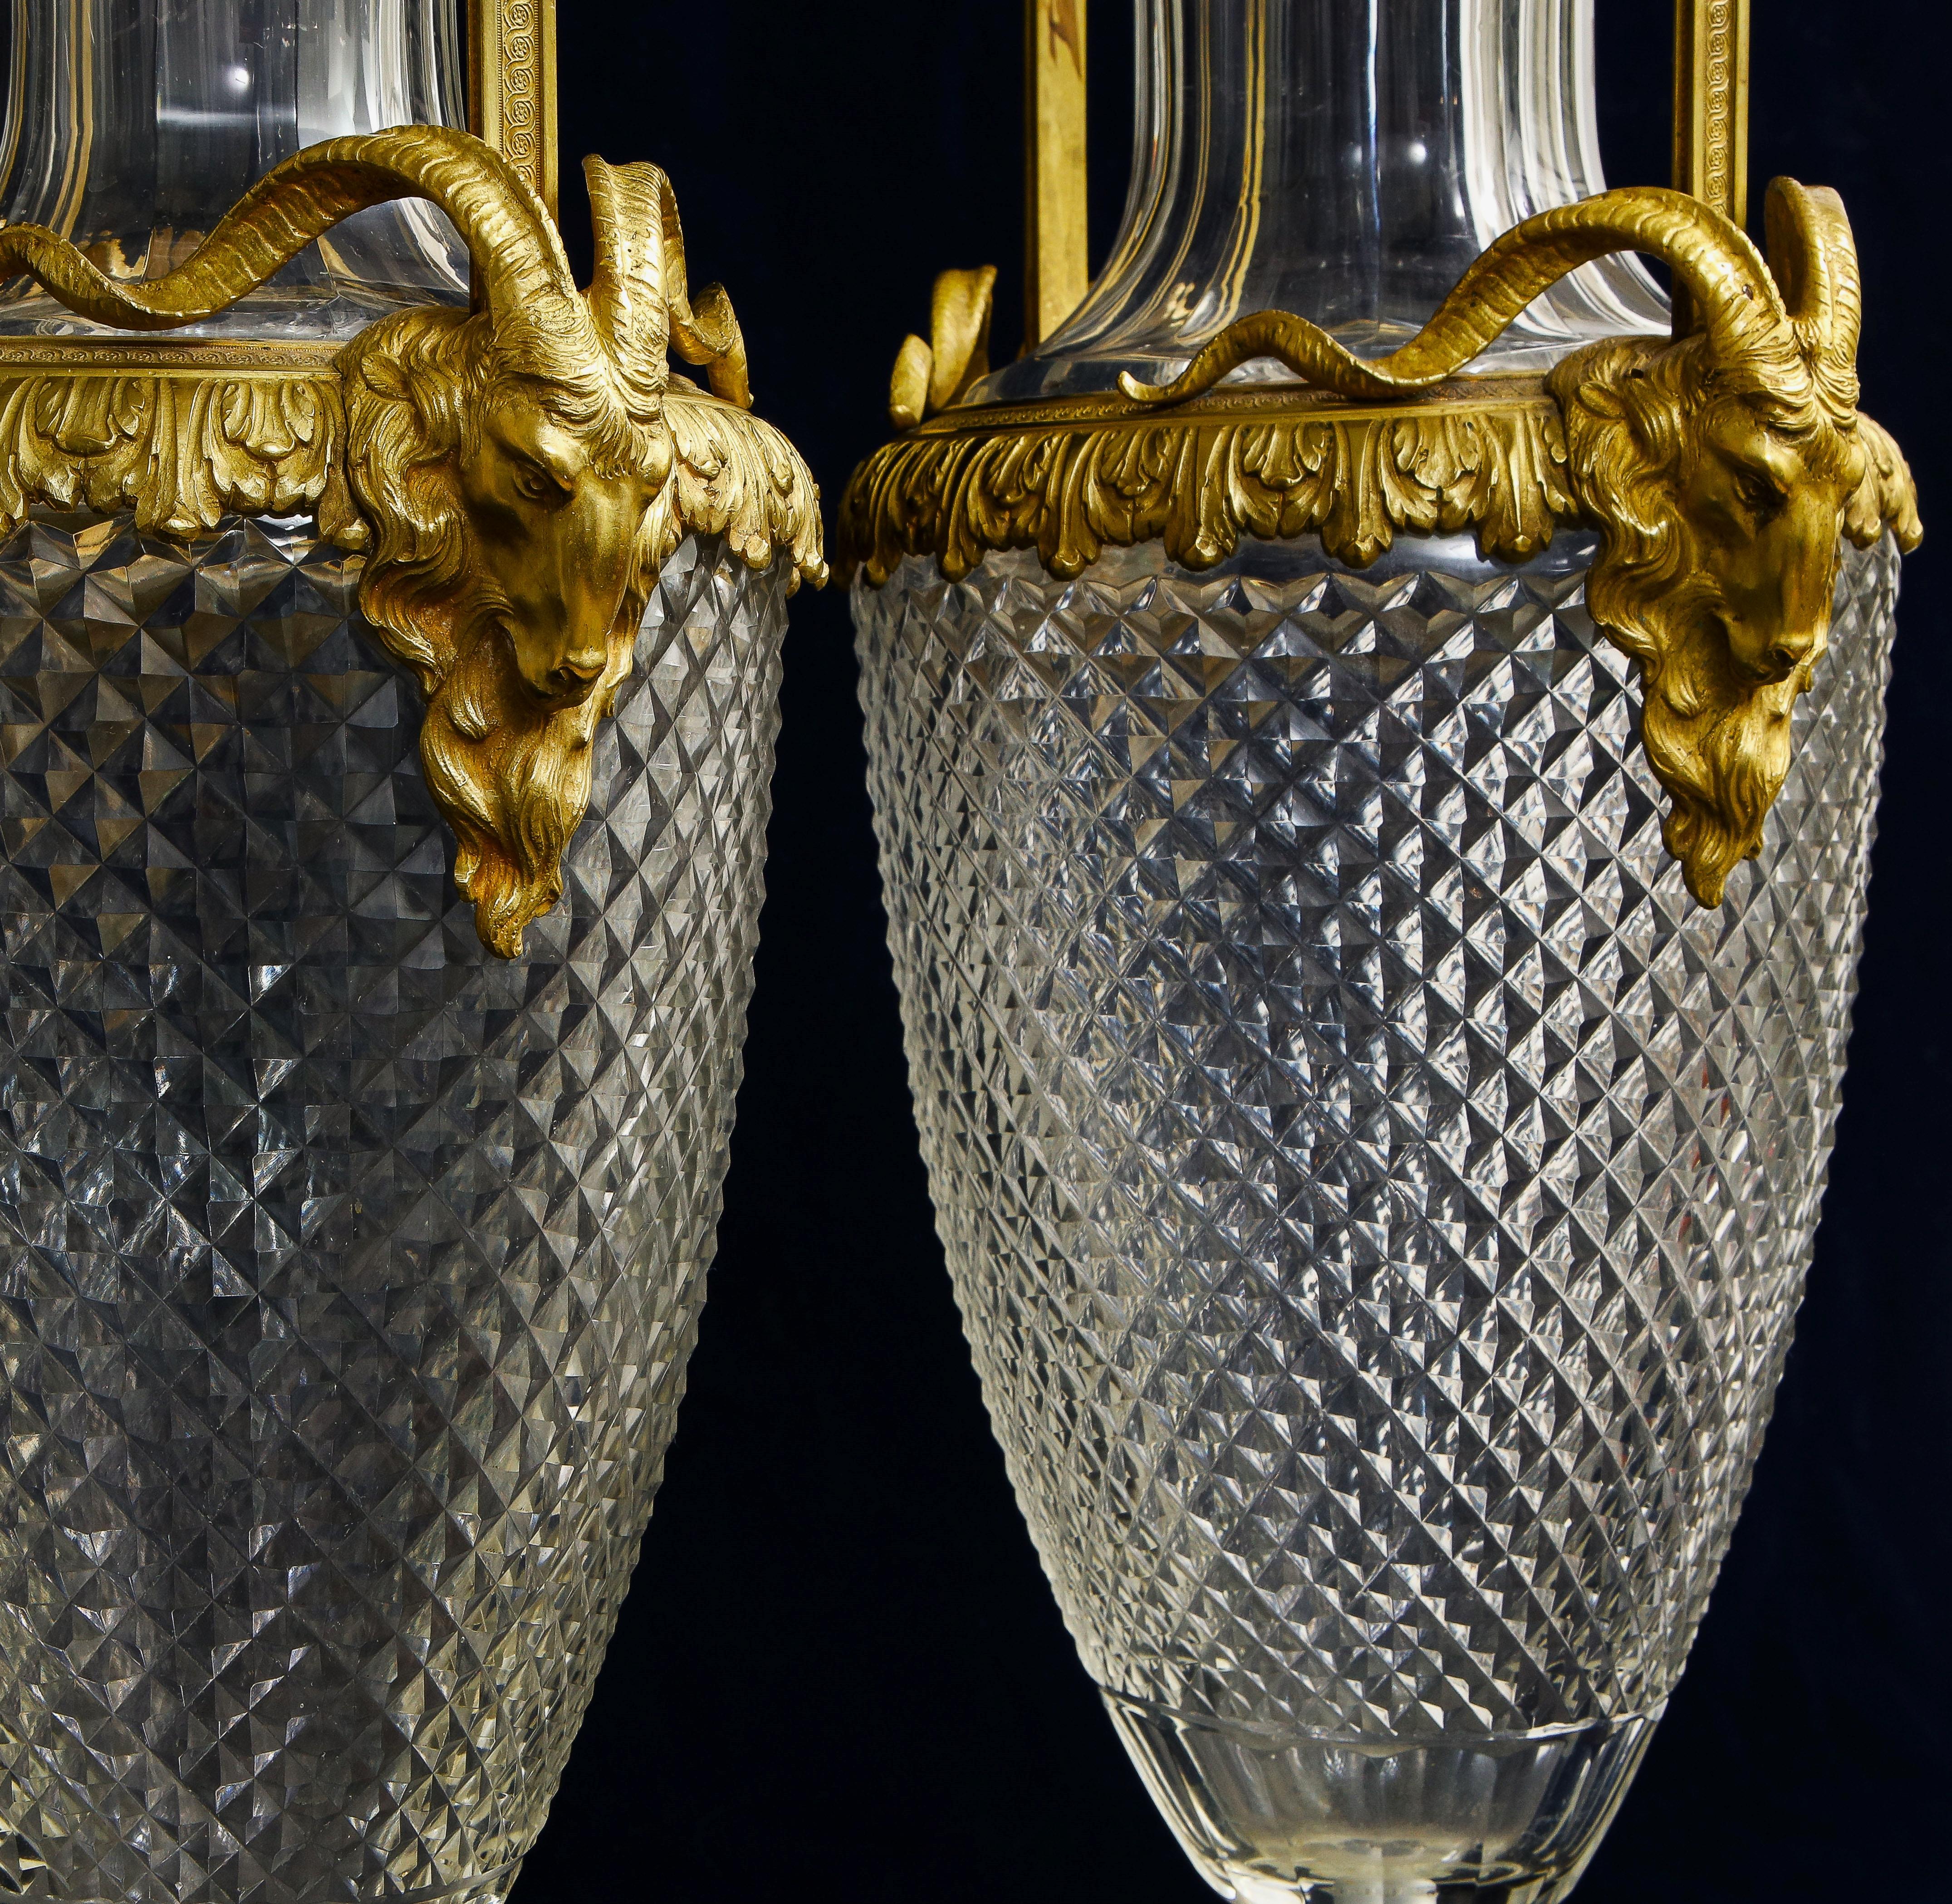 Pair of 19th Century French Dore Bronze Mounted Crystal Vases Attb to Baccarat For Sale 3